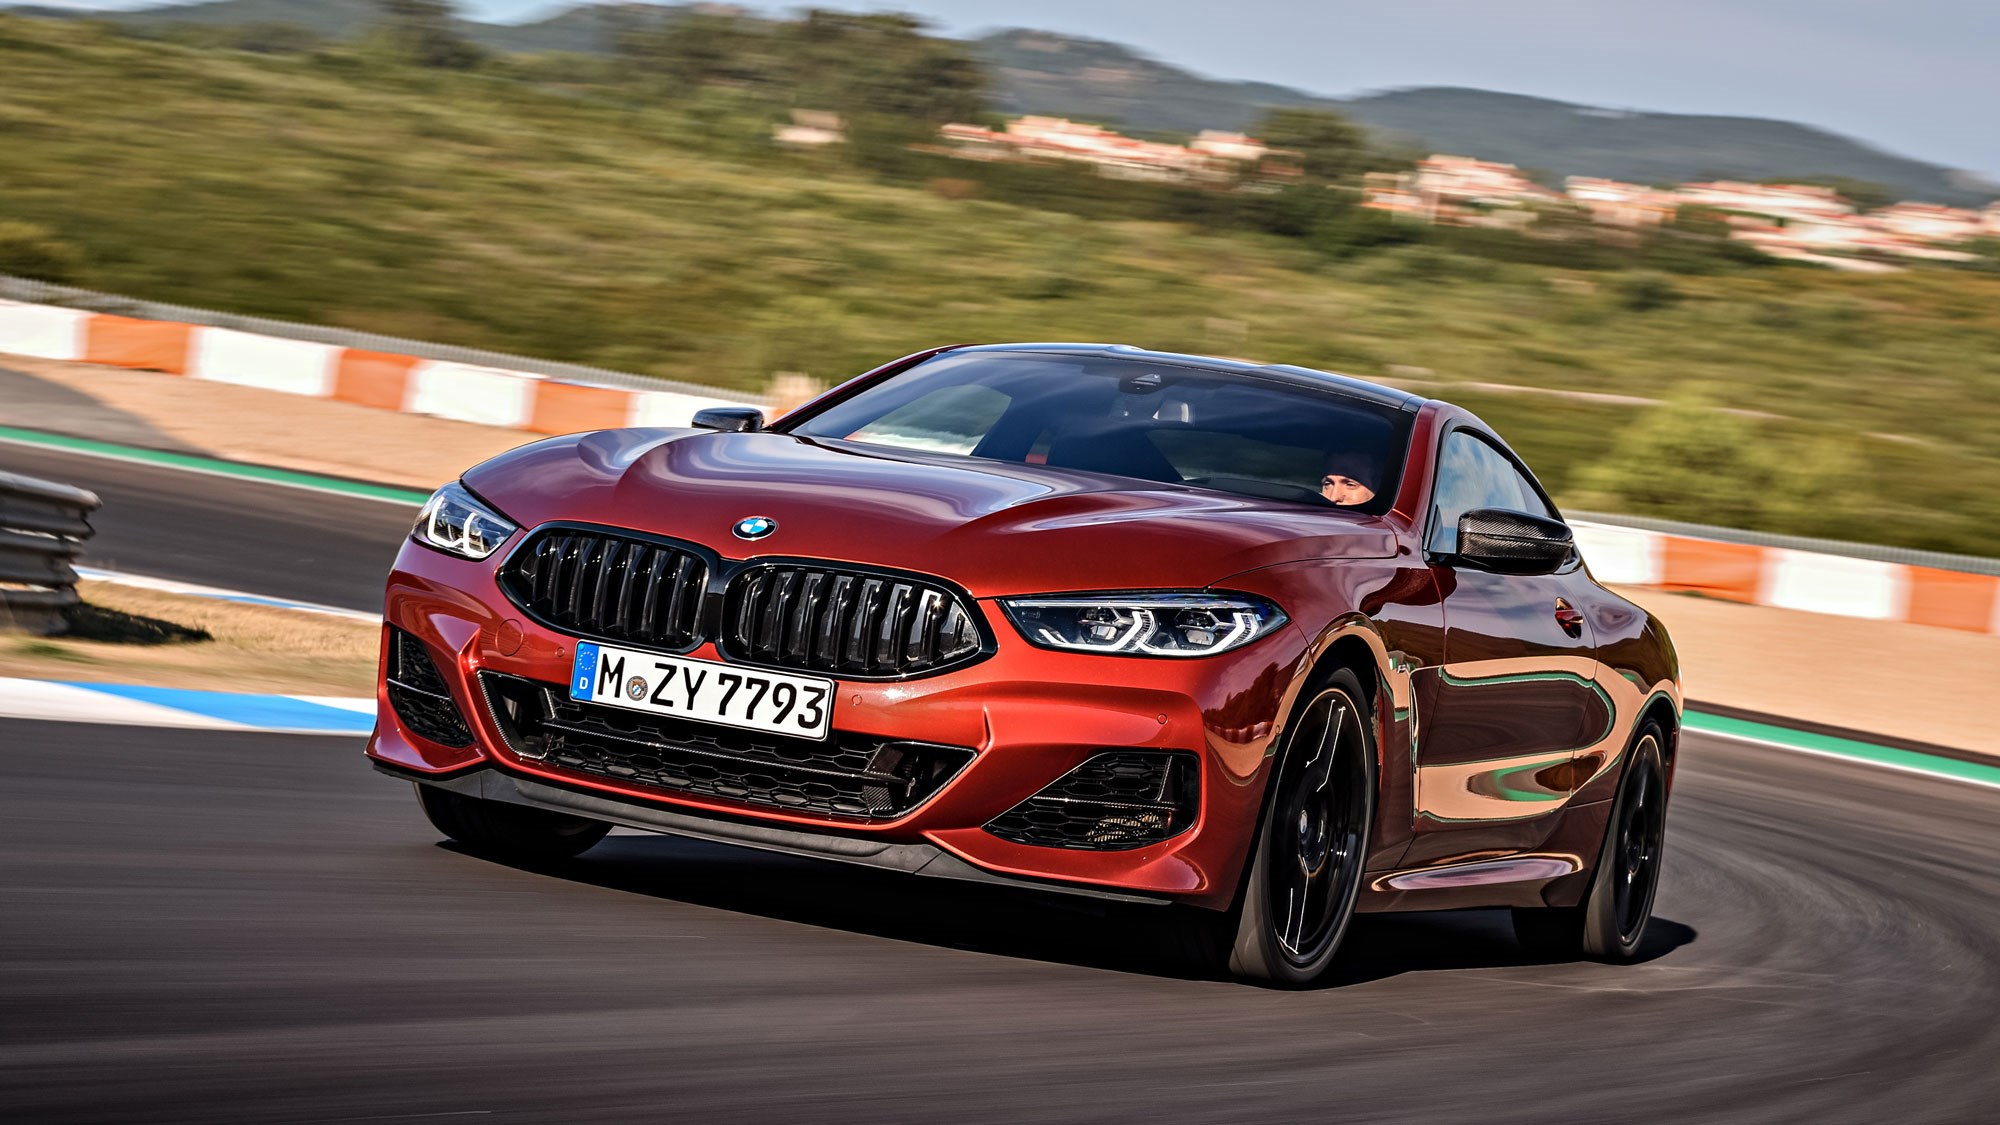 The BMW 8 Series: Refined Luxury For The Road Ahead